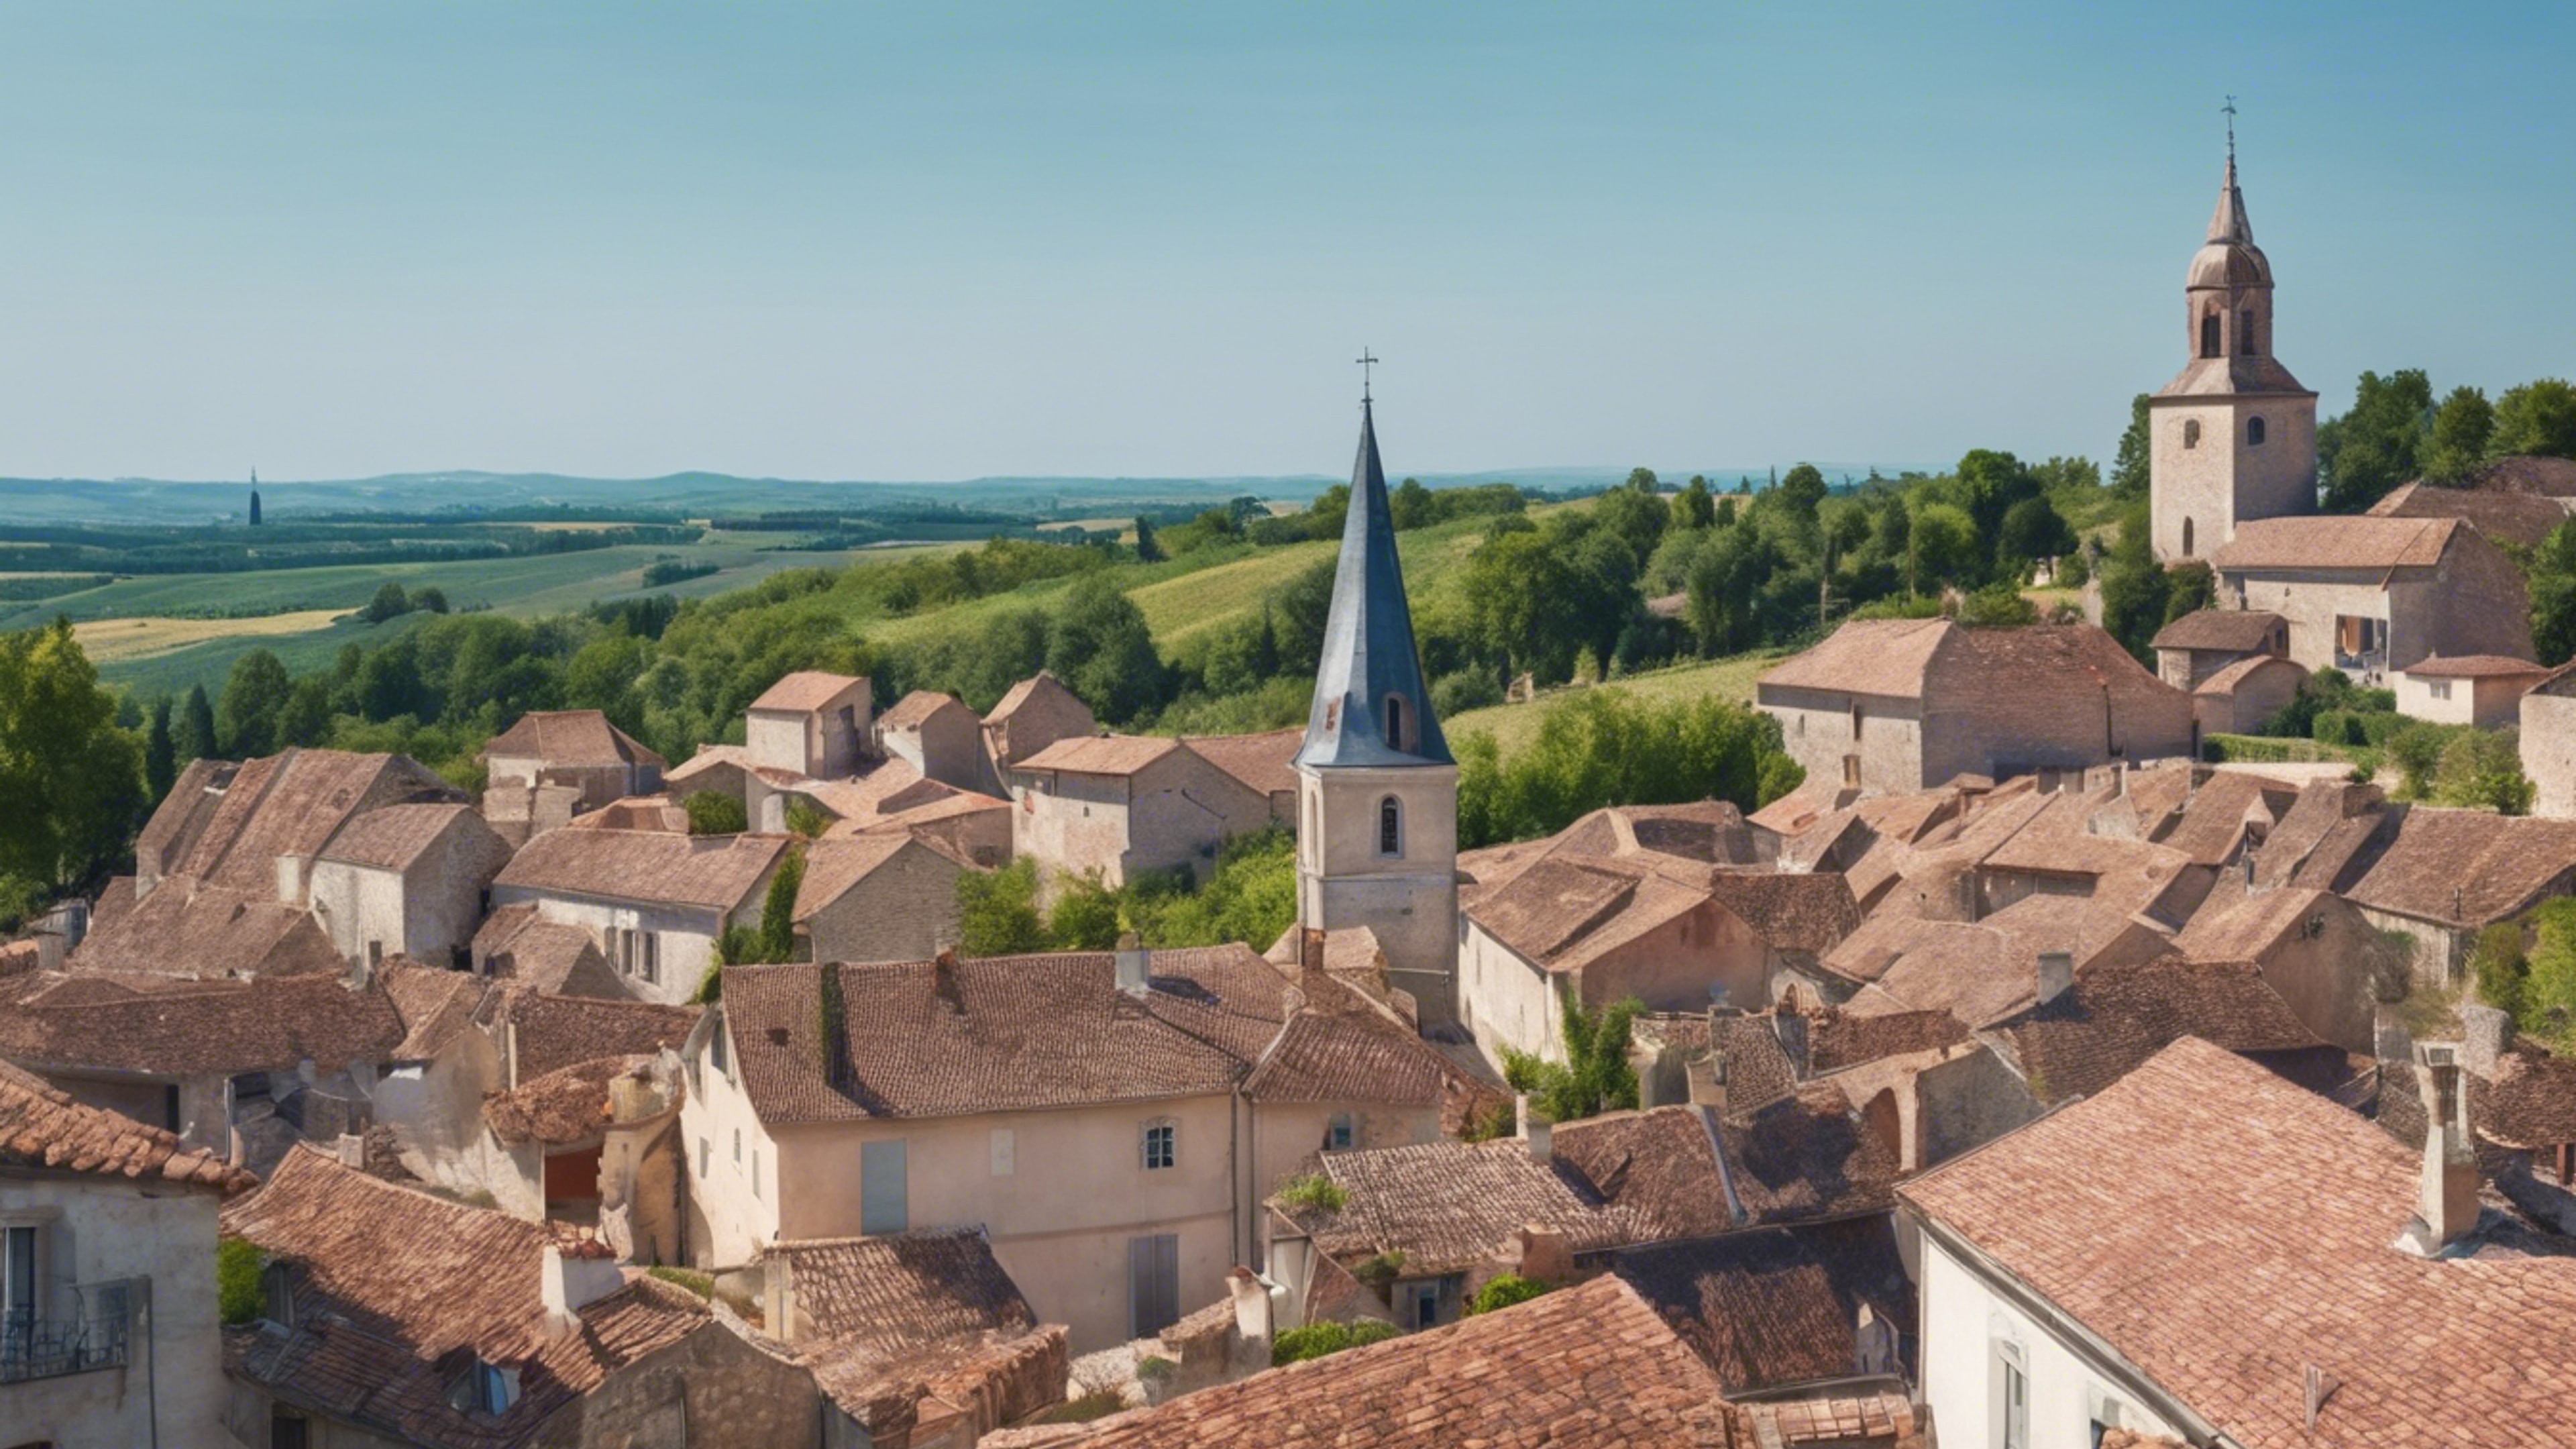 A panoramic view of a French country village with red-tiled roofs, a church spire, and surrounding vineyards under a clear blue sky. Tapet[29c4a00e876546cab0f2]